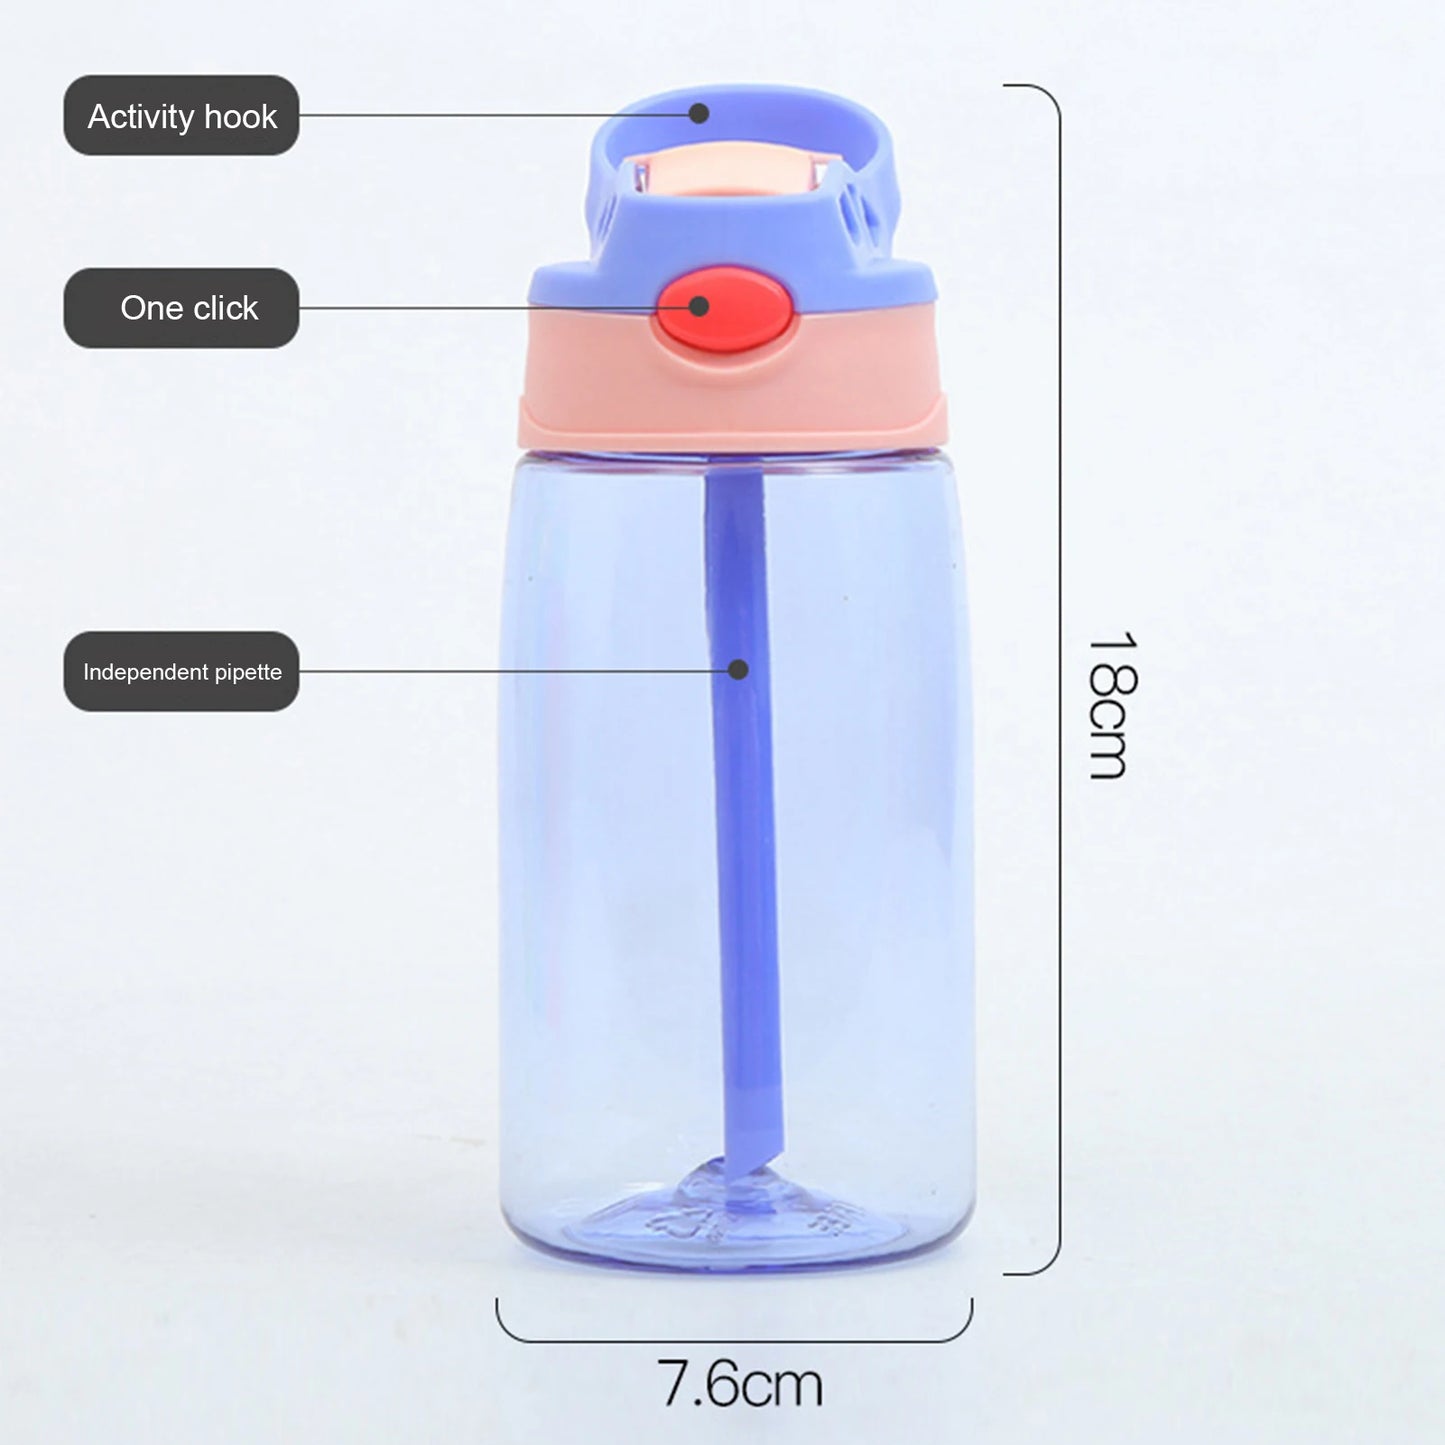 Stay Hydrated with Ease! water bottle